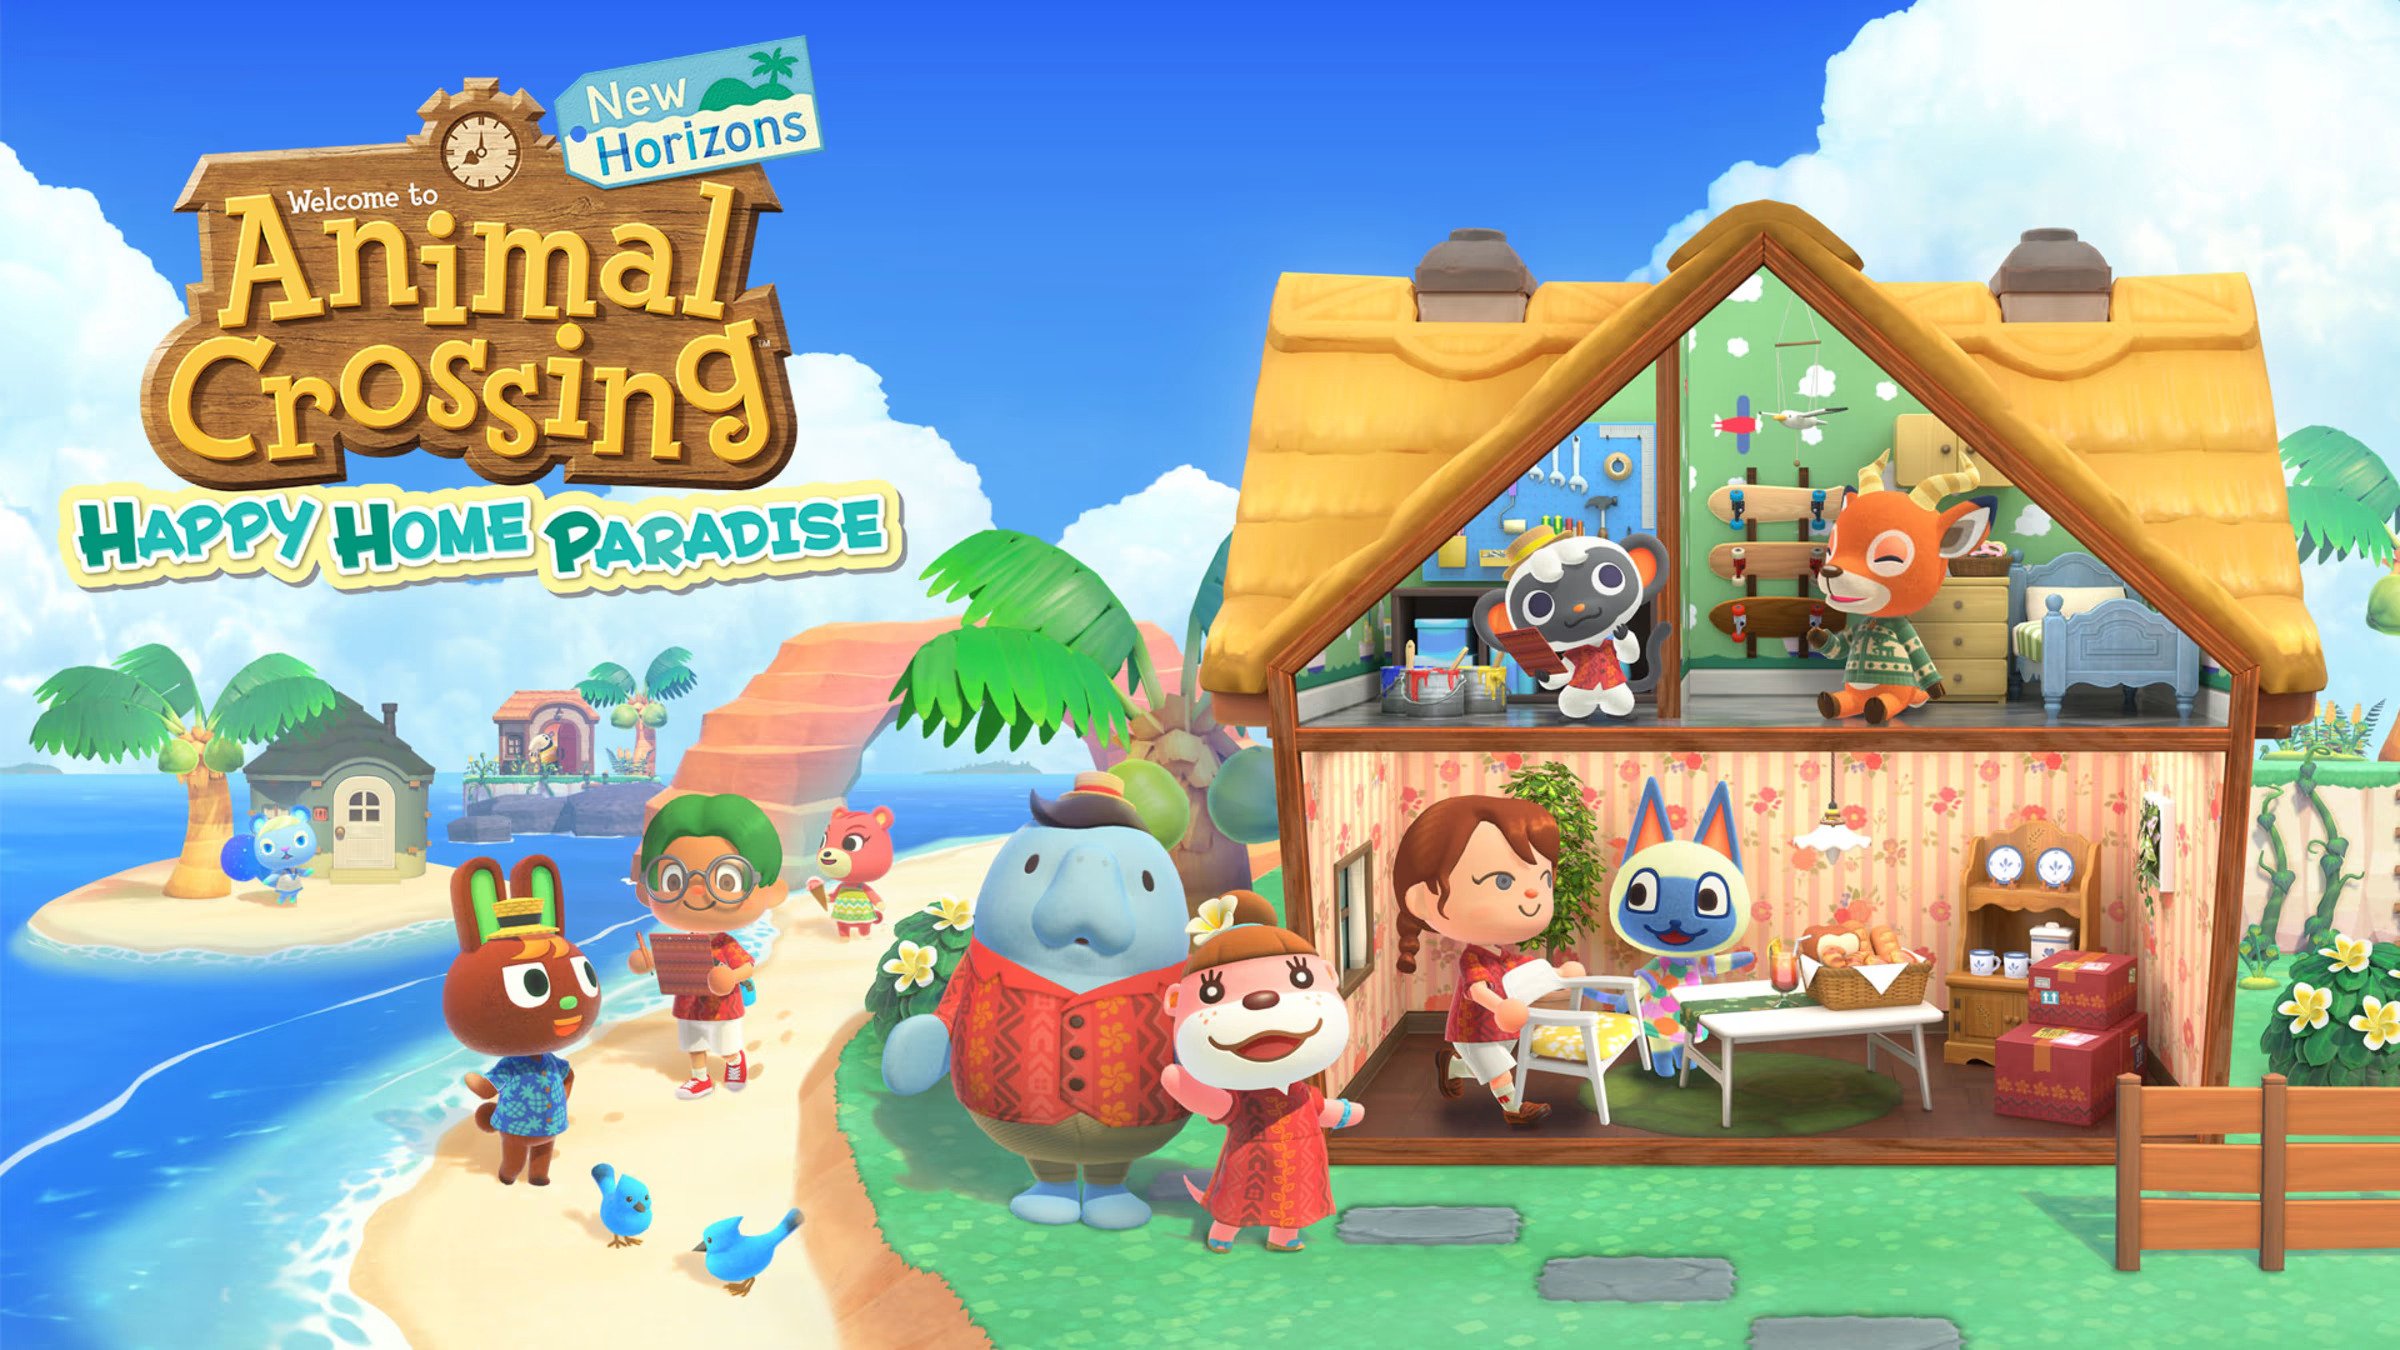 Animal crossing new horizons game cover